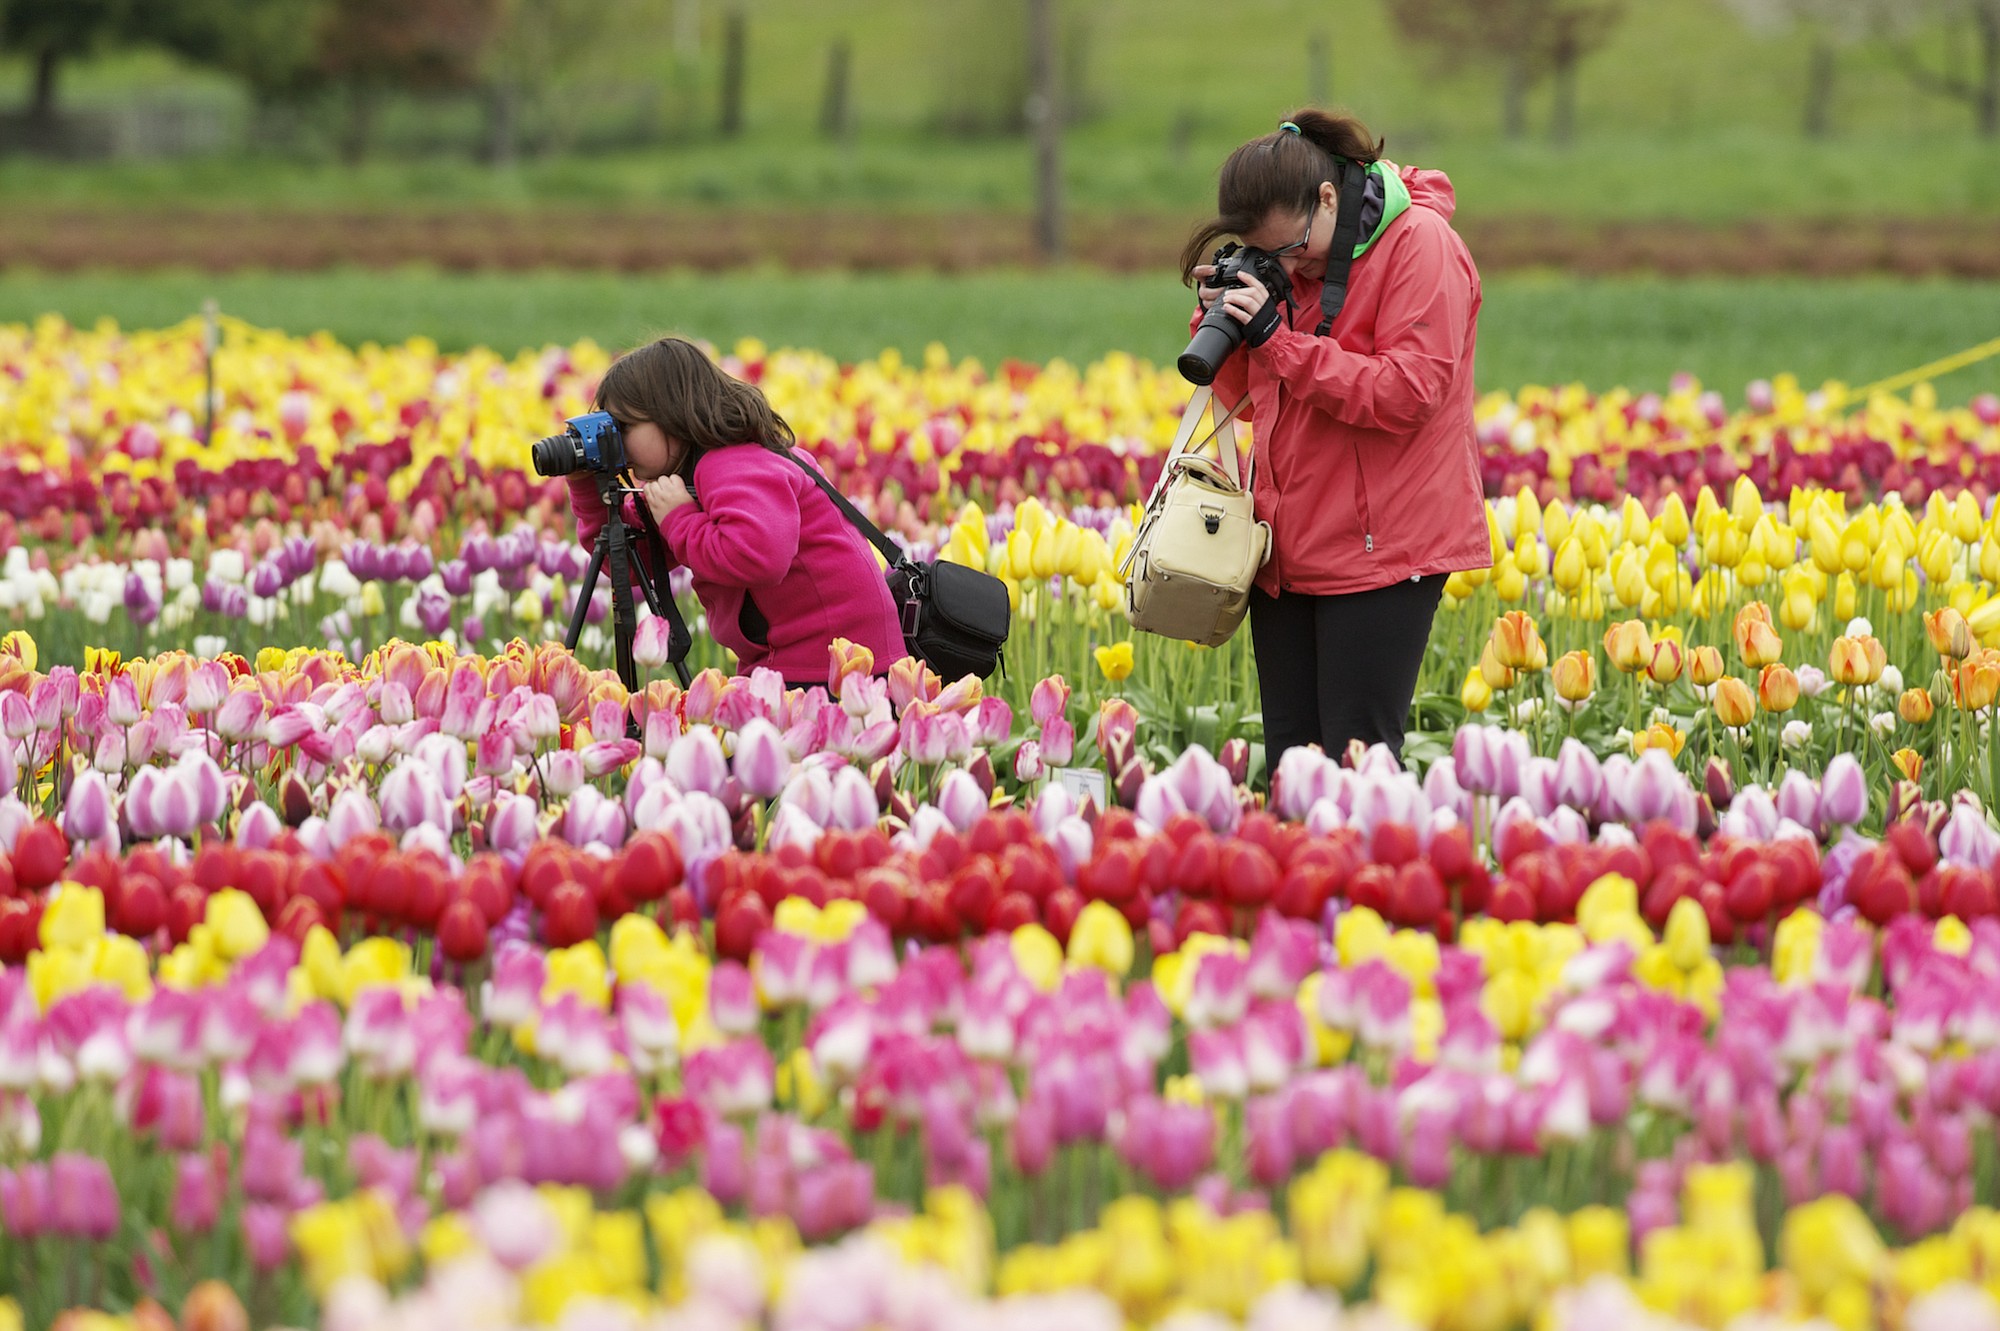 Cassandra Hagen, 10, and her mother Kristy Hagen photograph tulips Saturday at the Holland America Bulb Farms Tulip Festival in Woodland.